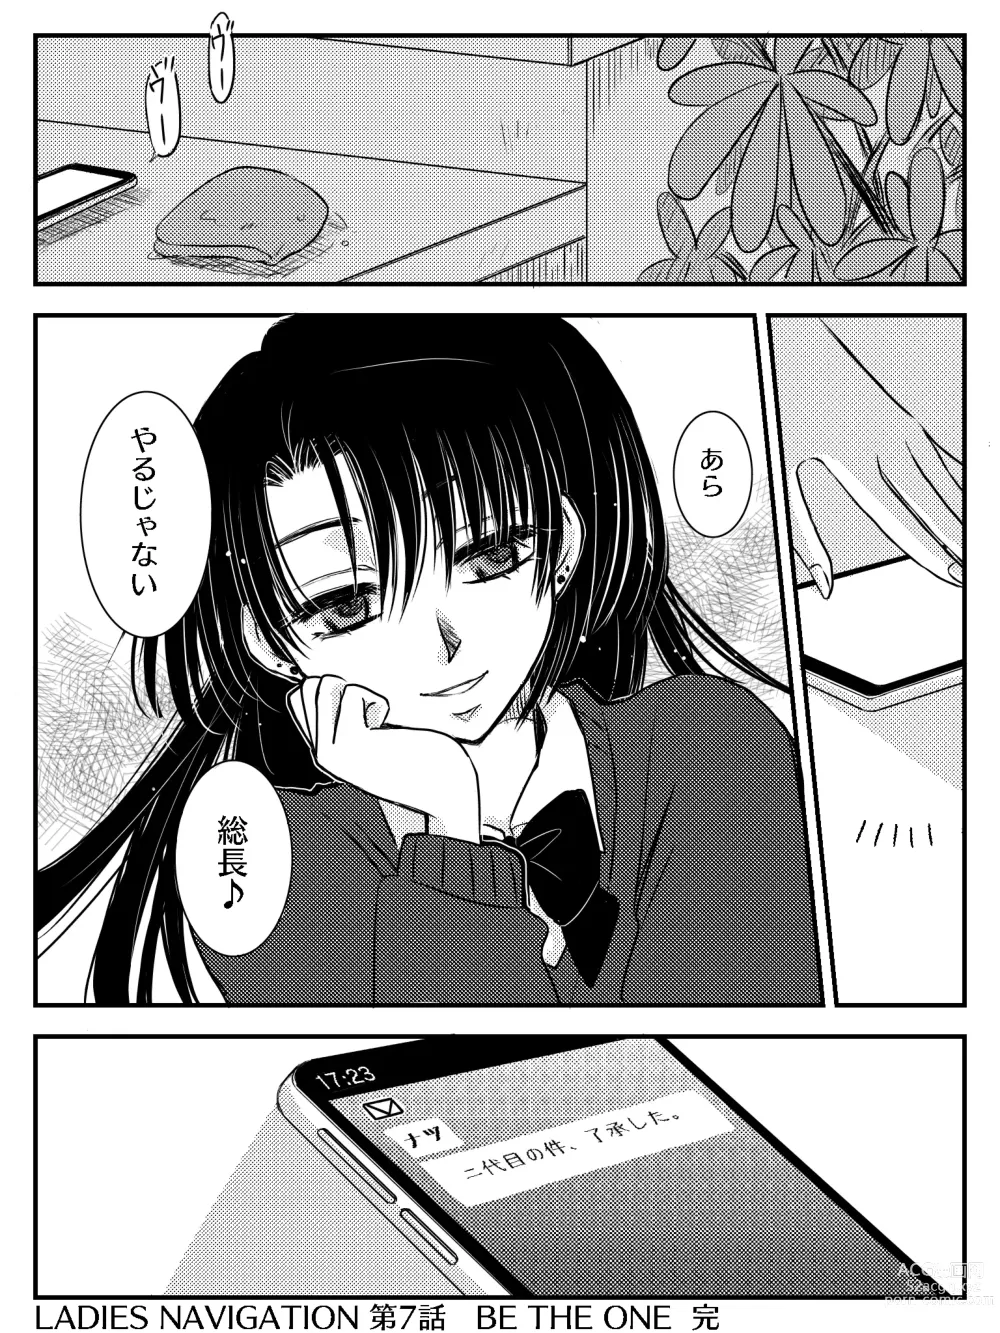 Page 49 of doujinshi LADIES NAVIGATION Episode 7 BE THE ONE